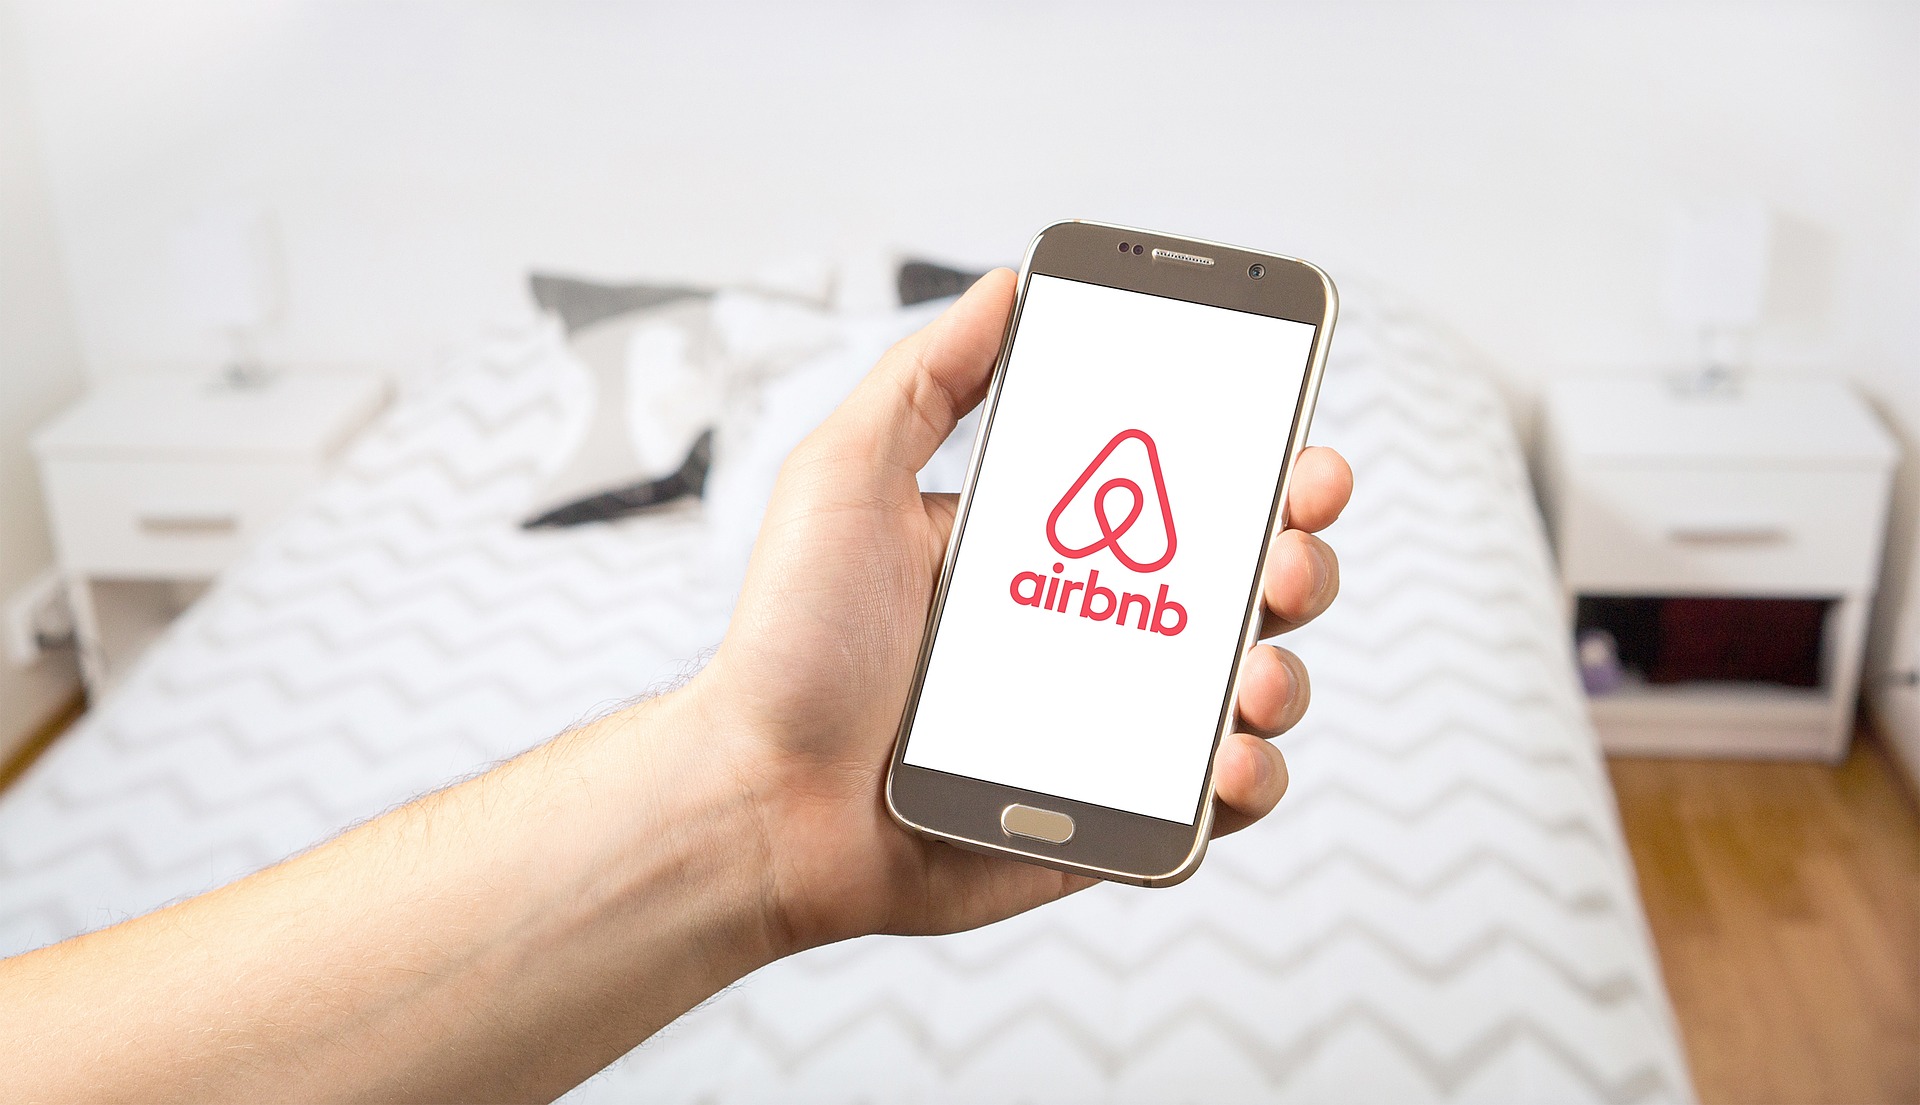 Airbnb users risk insurance sting for properties